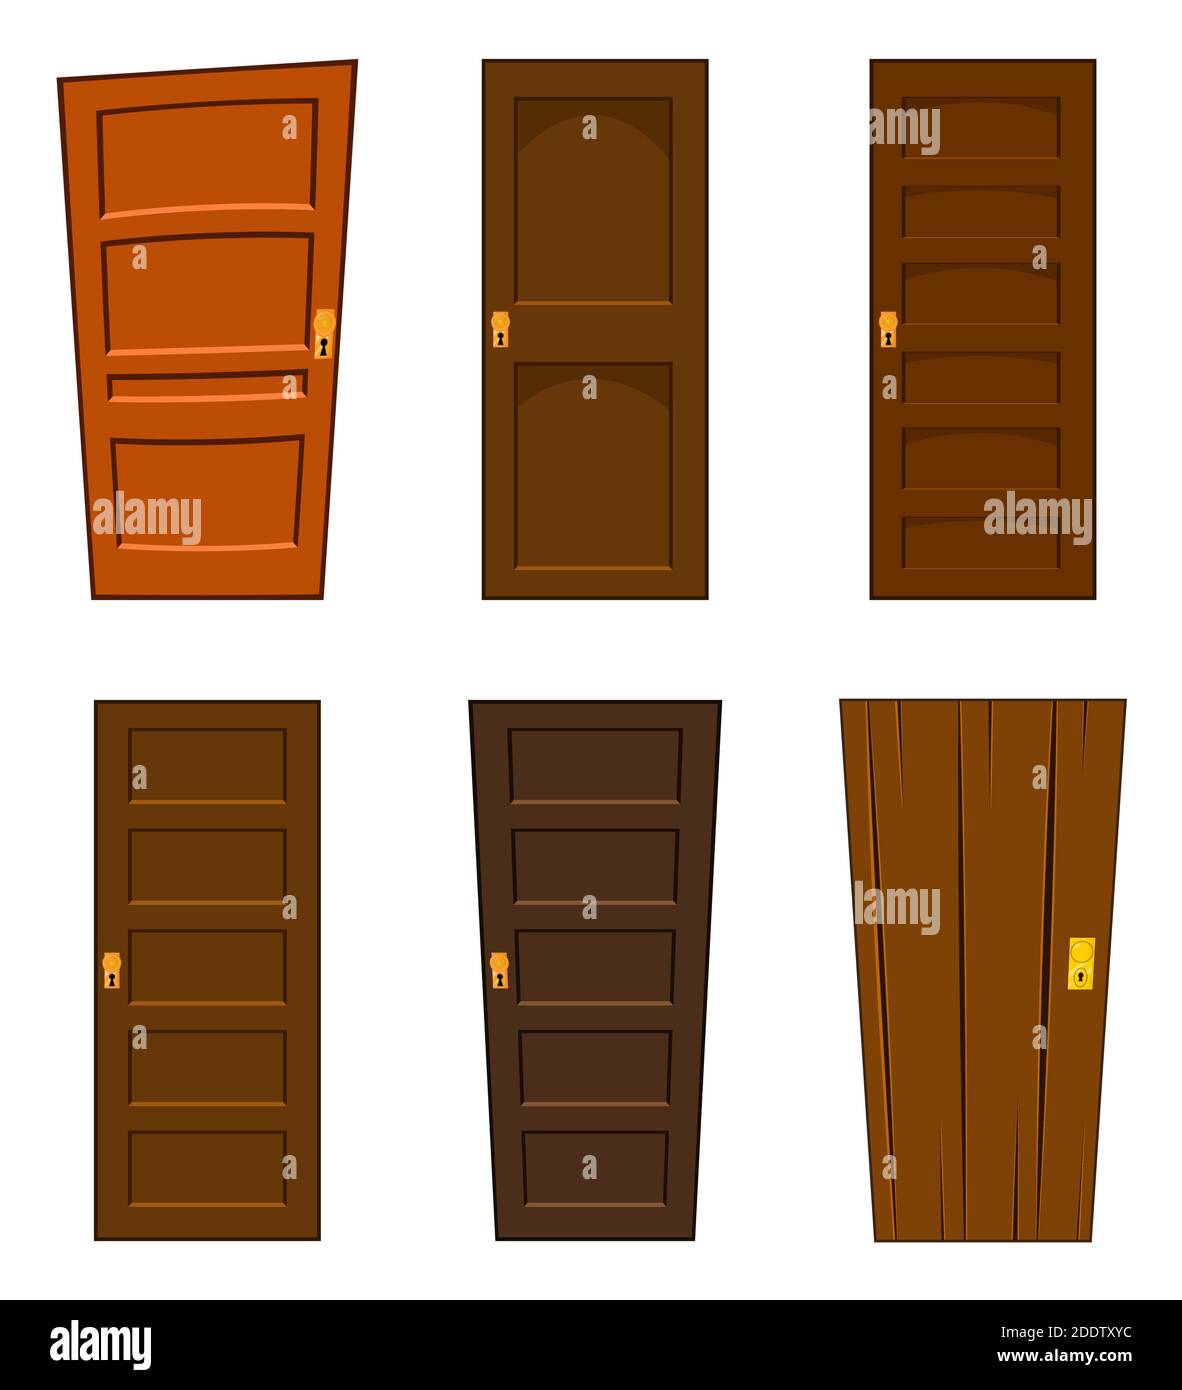 Door vector set isolated on white background. Collection of cartoon home design element. Brown closed wood doorway in different style. Locked apartmen Stock Vector